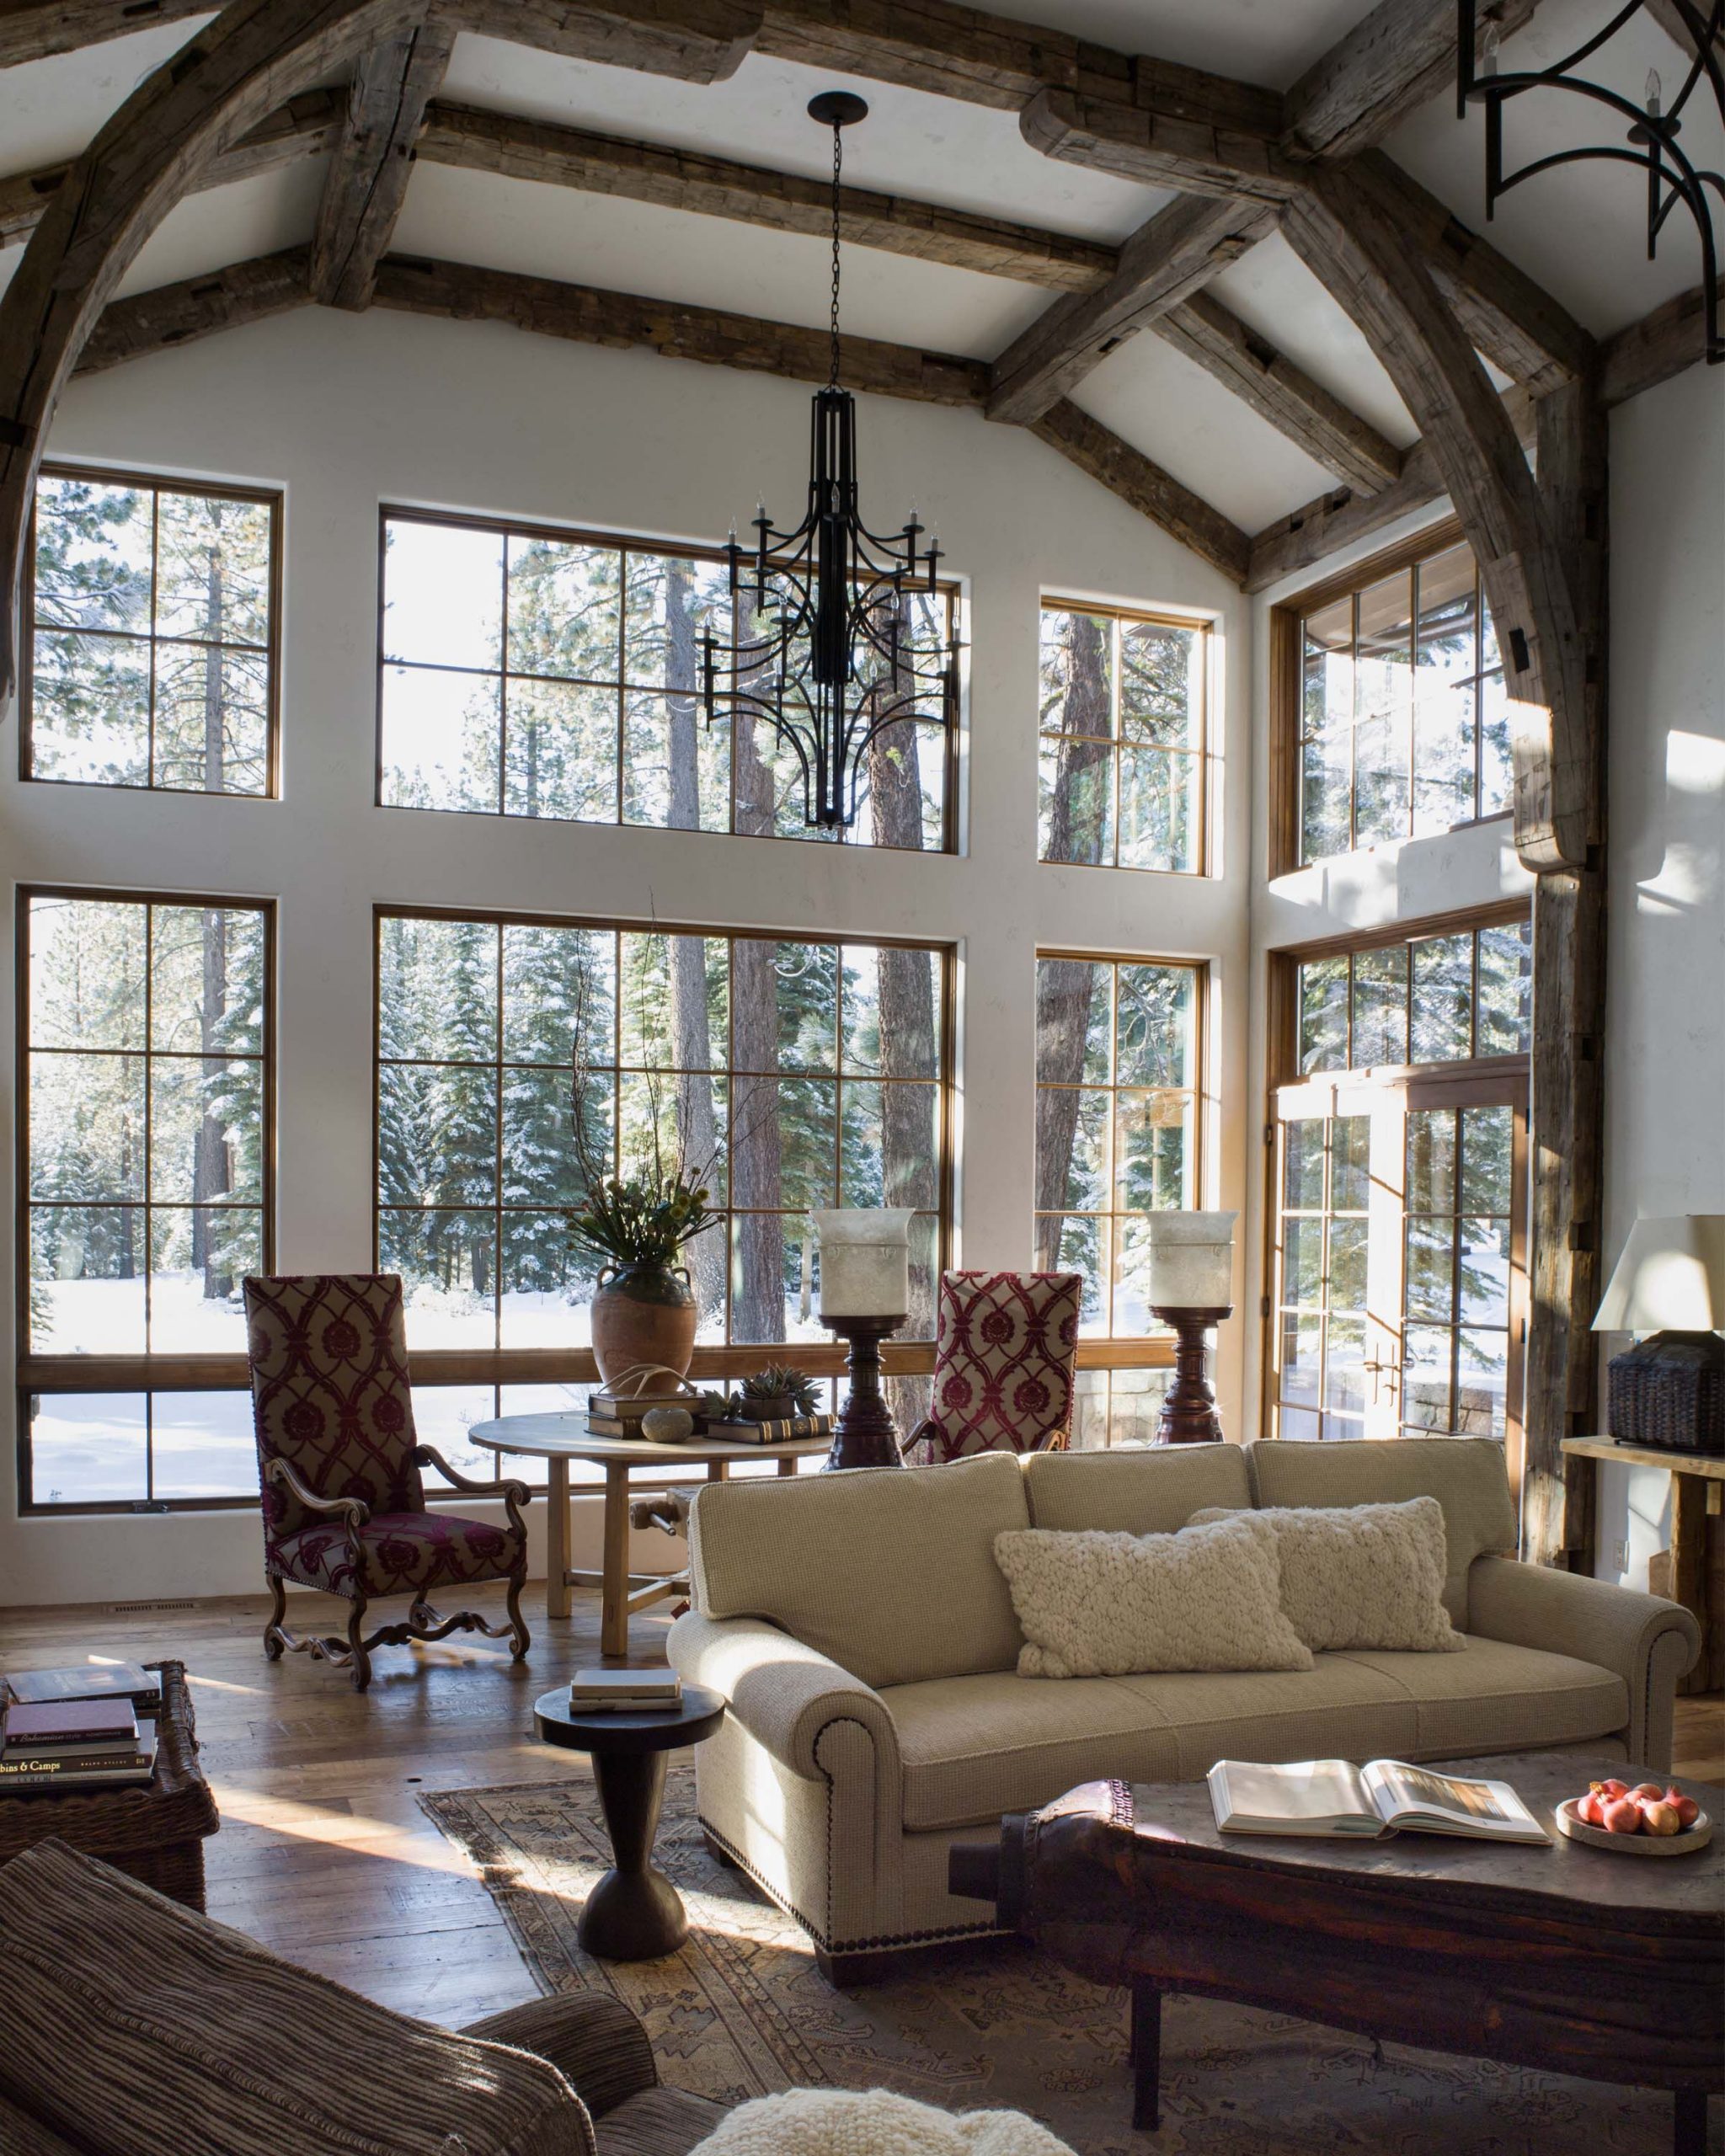 sunroom with glass walls and reclaimed timber beams